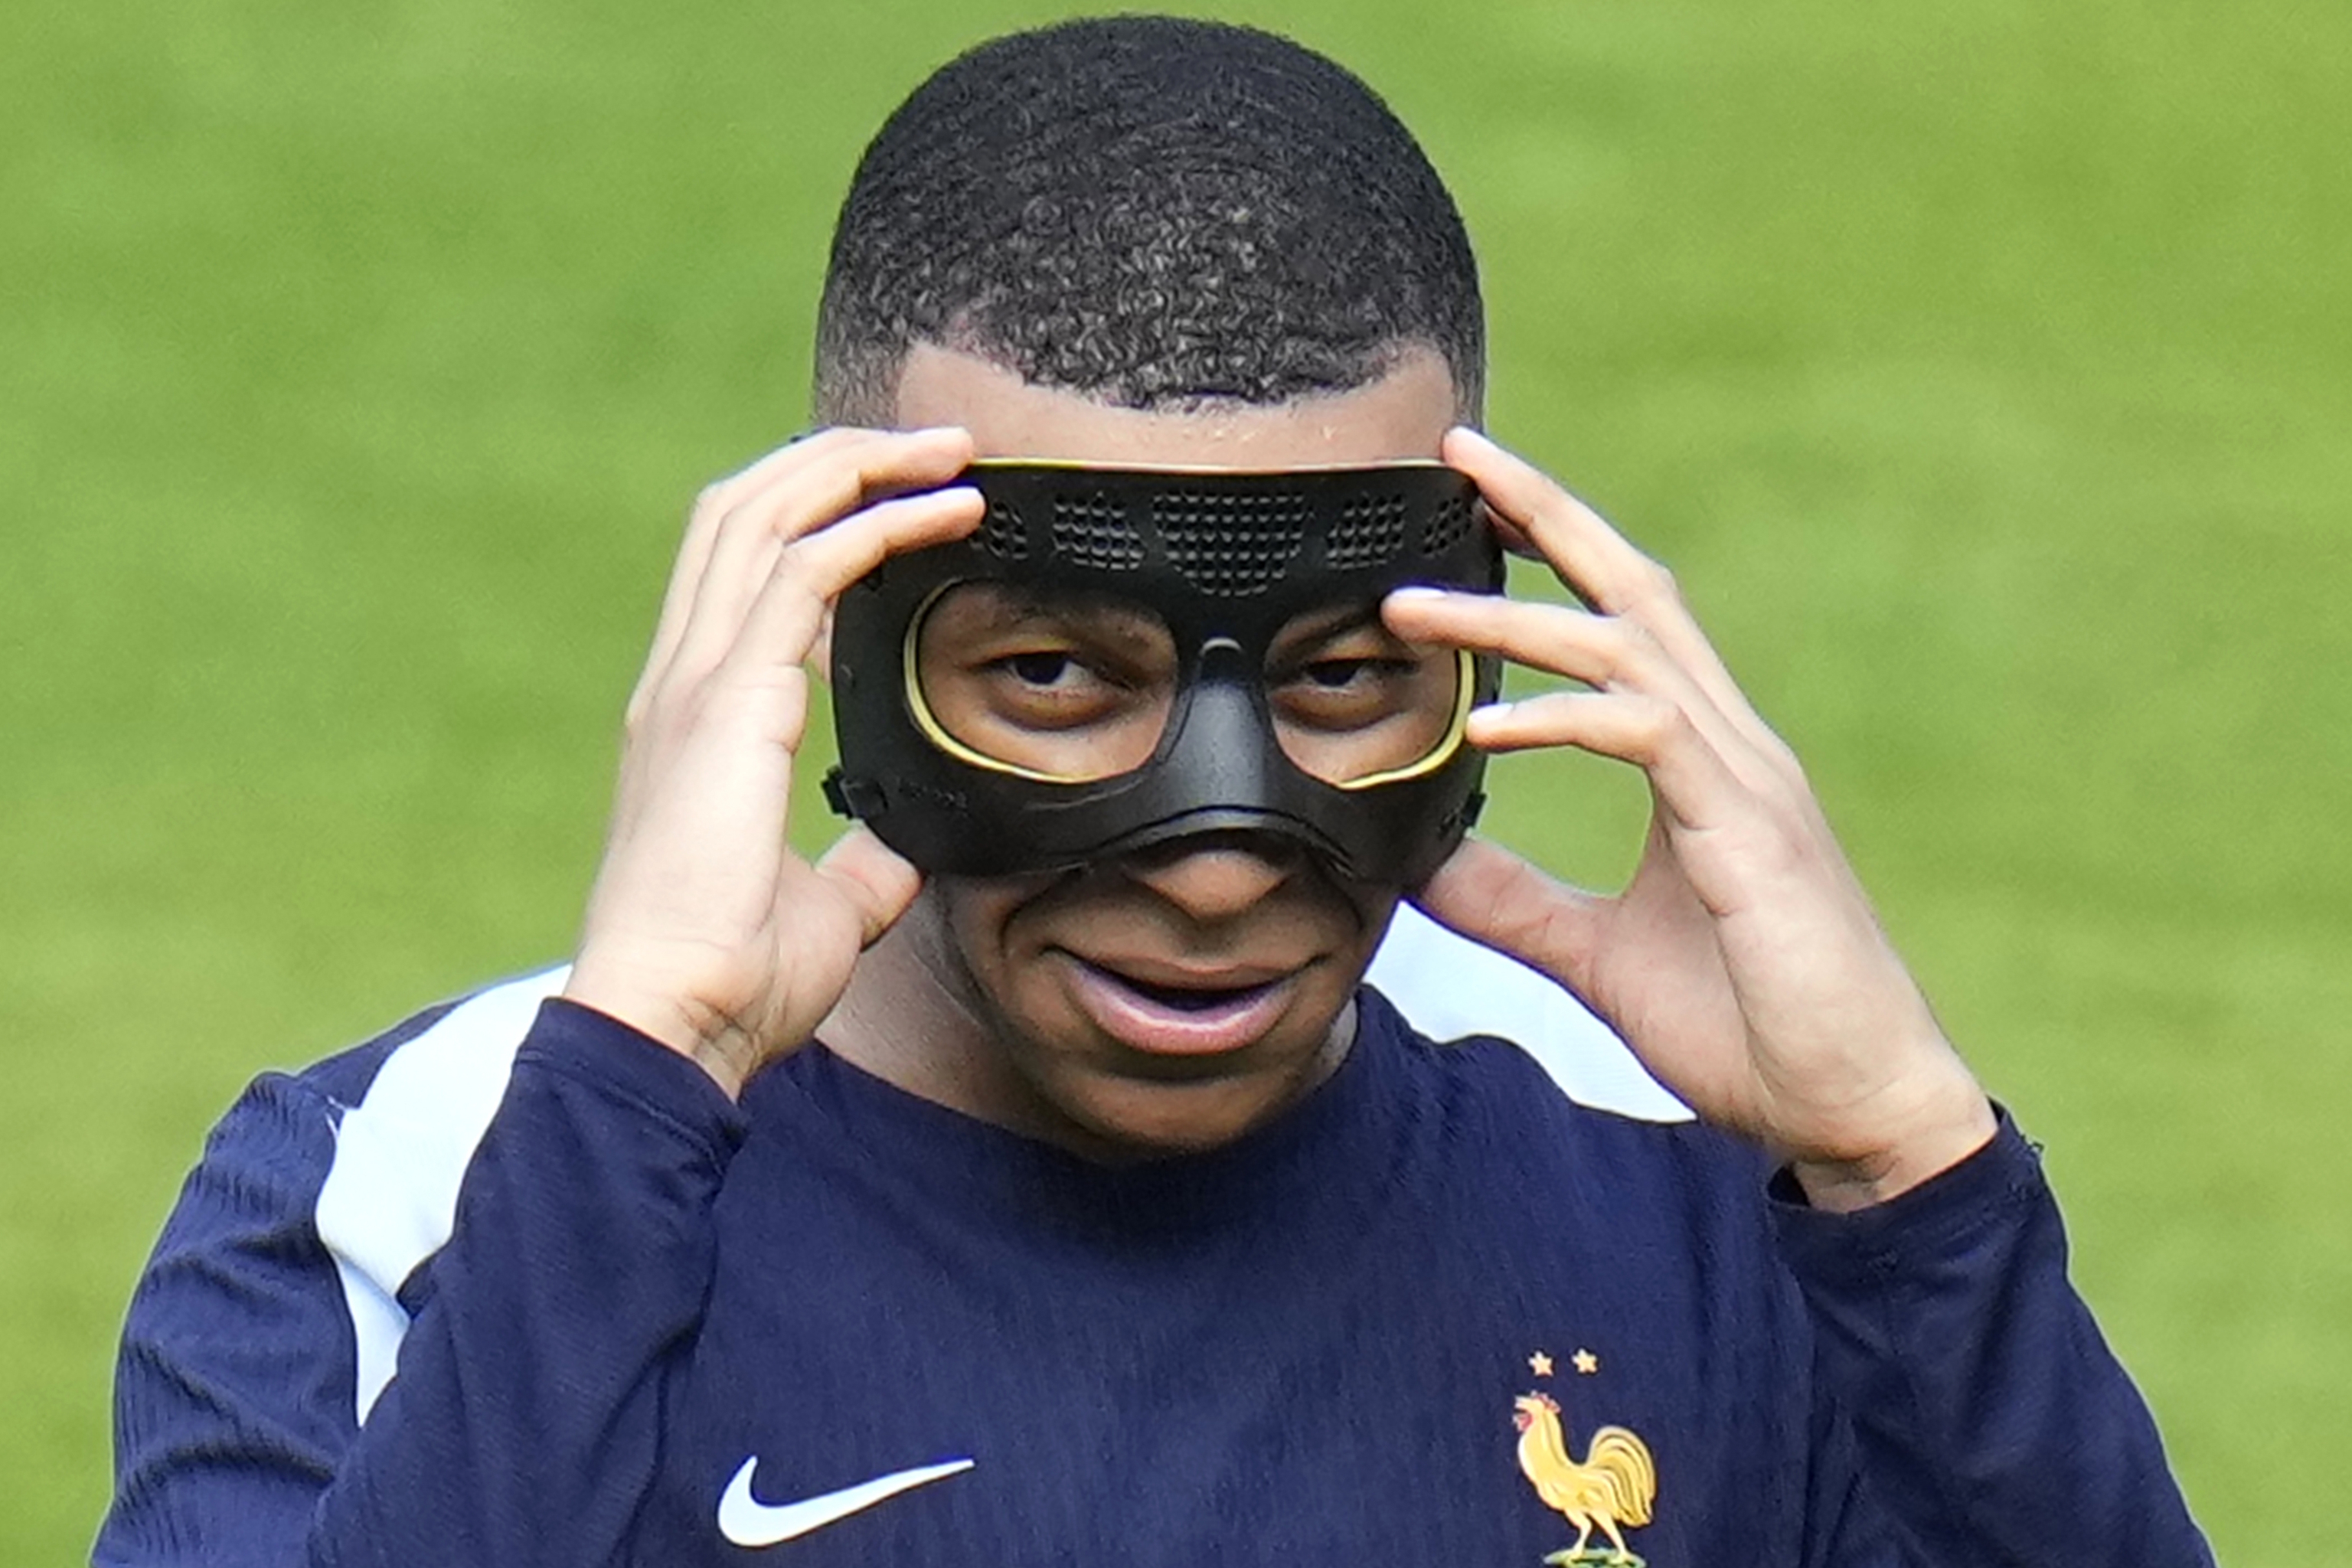 Mbappe gestures as he adjusts his face mask.